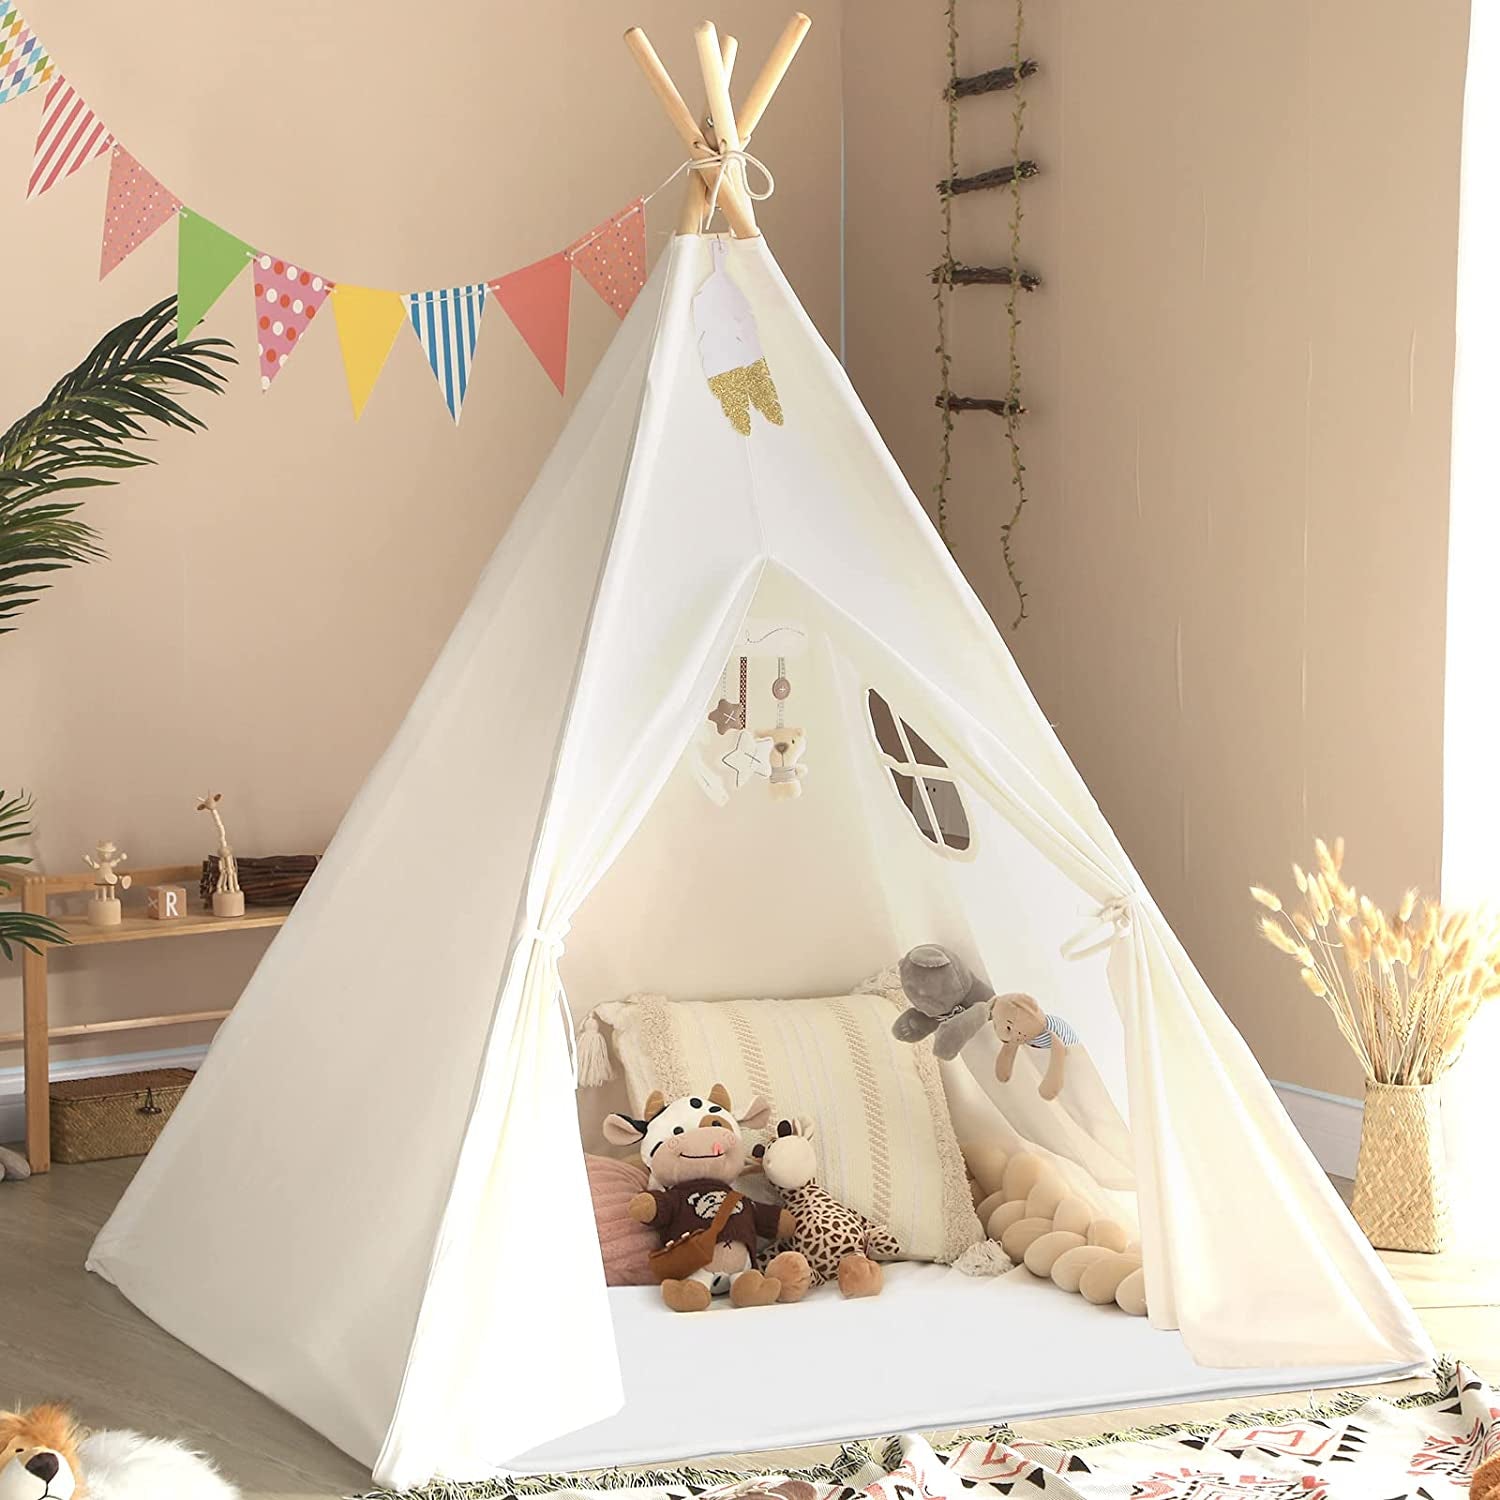 Teepee Tent for Kids with Carry Case, Natural Canvas Teepee Play Tent, Toys for Girls/Boys Indoor &amp; Outdoor Playing (White Teepee Tent)